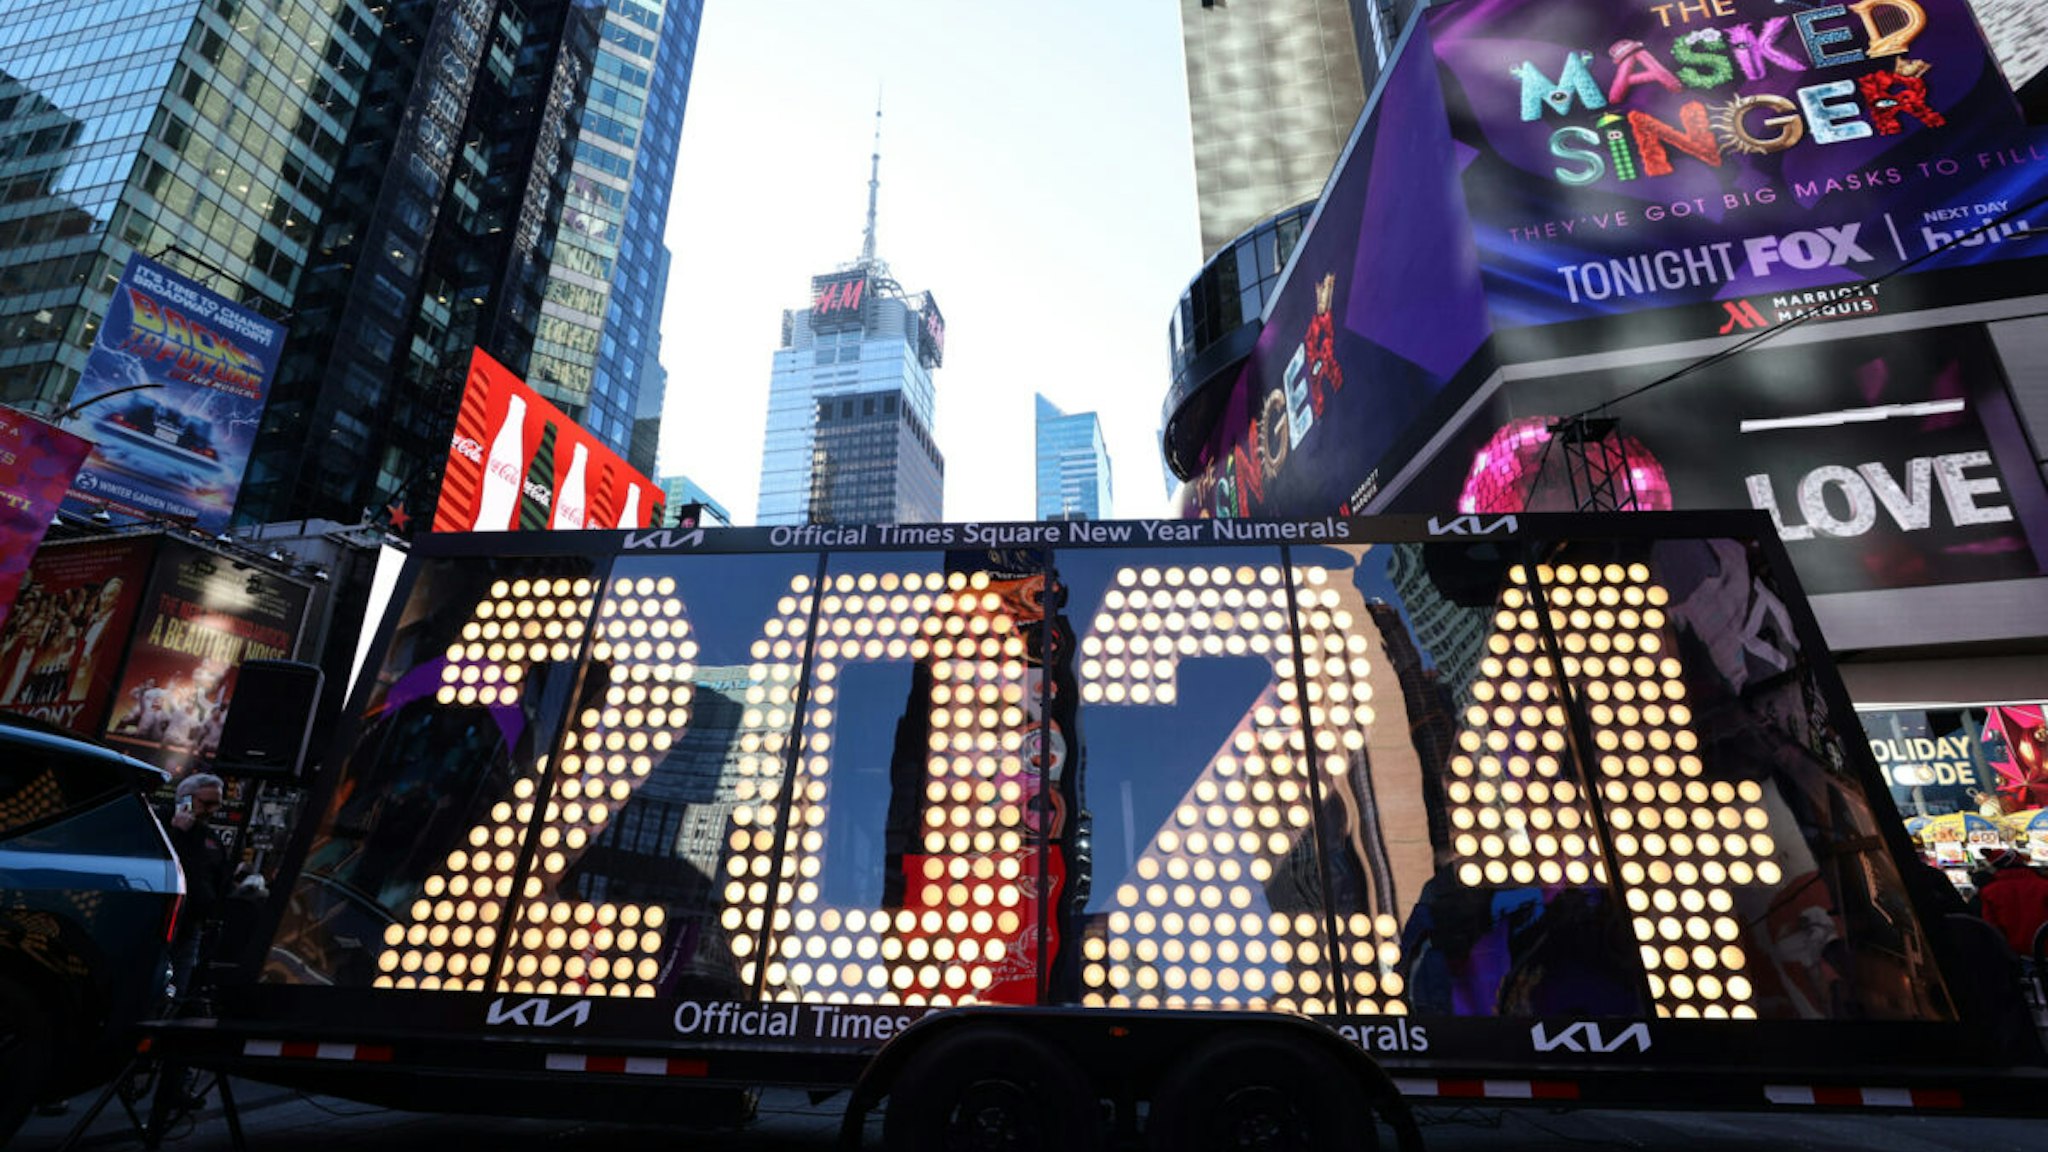 A view of the New Year's Eve '2024' Numerals, to be lit up at midnight on December 31, in New York's world-famous Times Square in United States on December 20, 2023.